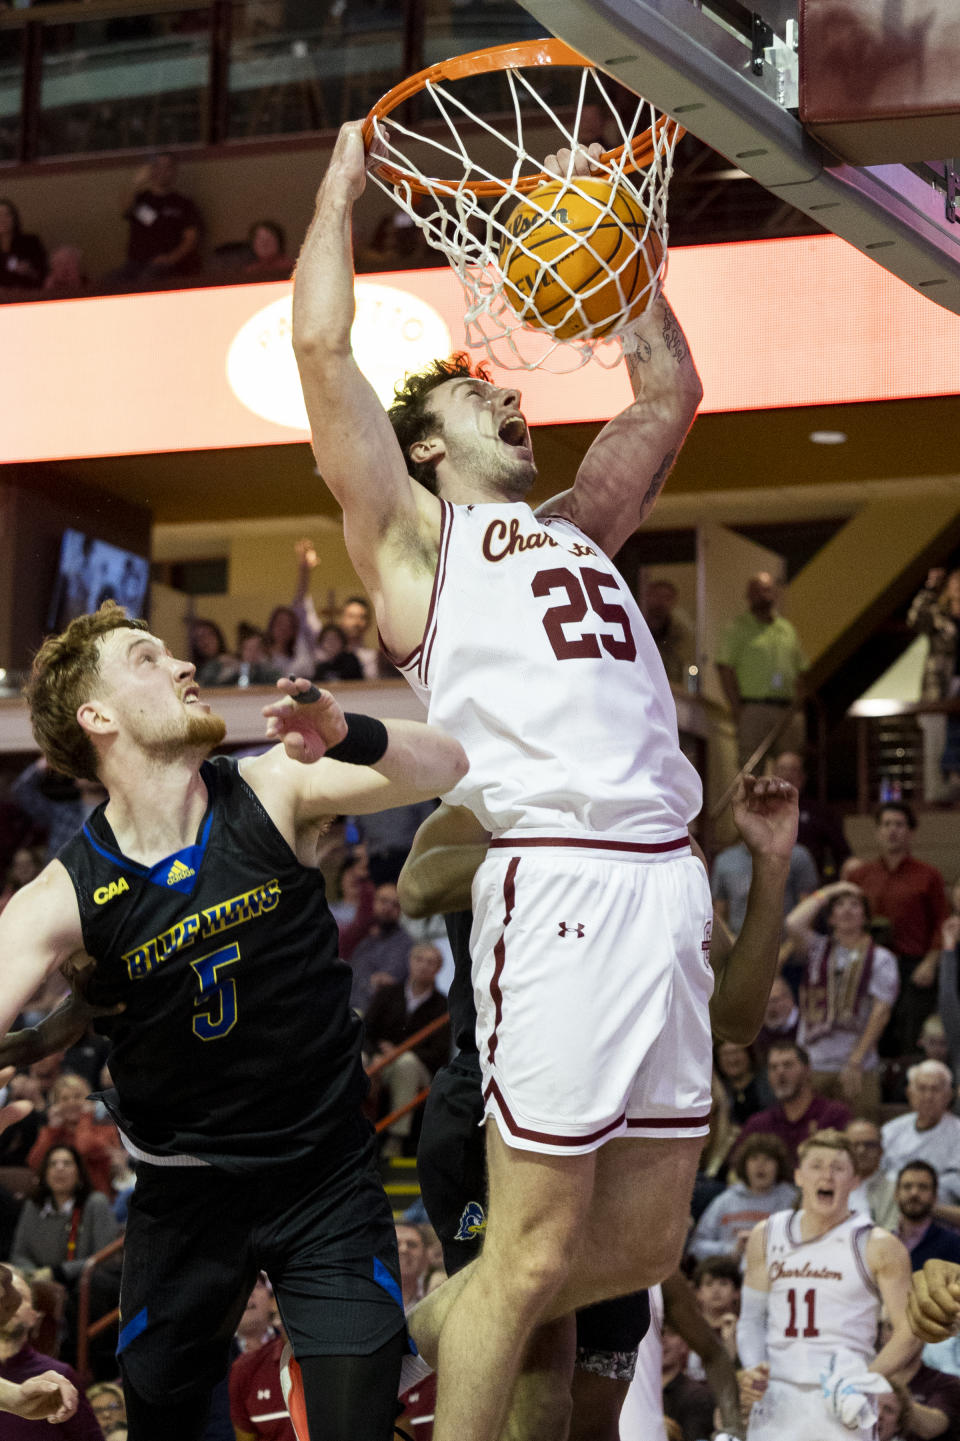 College of Charleston's Ben Burnham (25) dunks after a missed shot over Delaware's Ray Christian (5) late in the second half that helped secure Charleston's 75-64 victory during a NCAA college basketball game in Charleston, S.C., Saturday, Jan. 7, 2023. (AP Photo/Mic Smith)